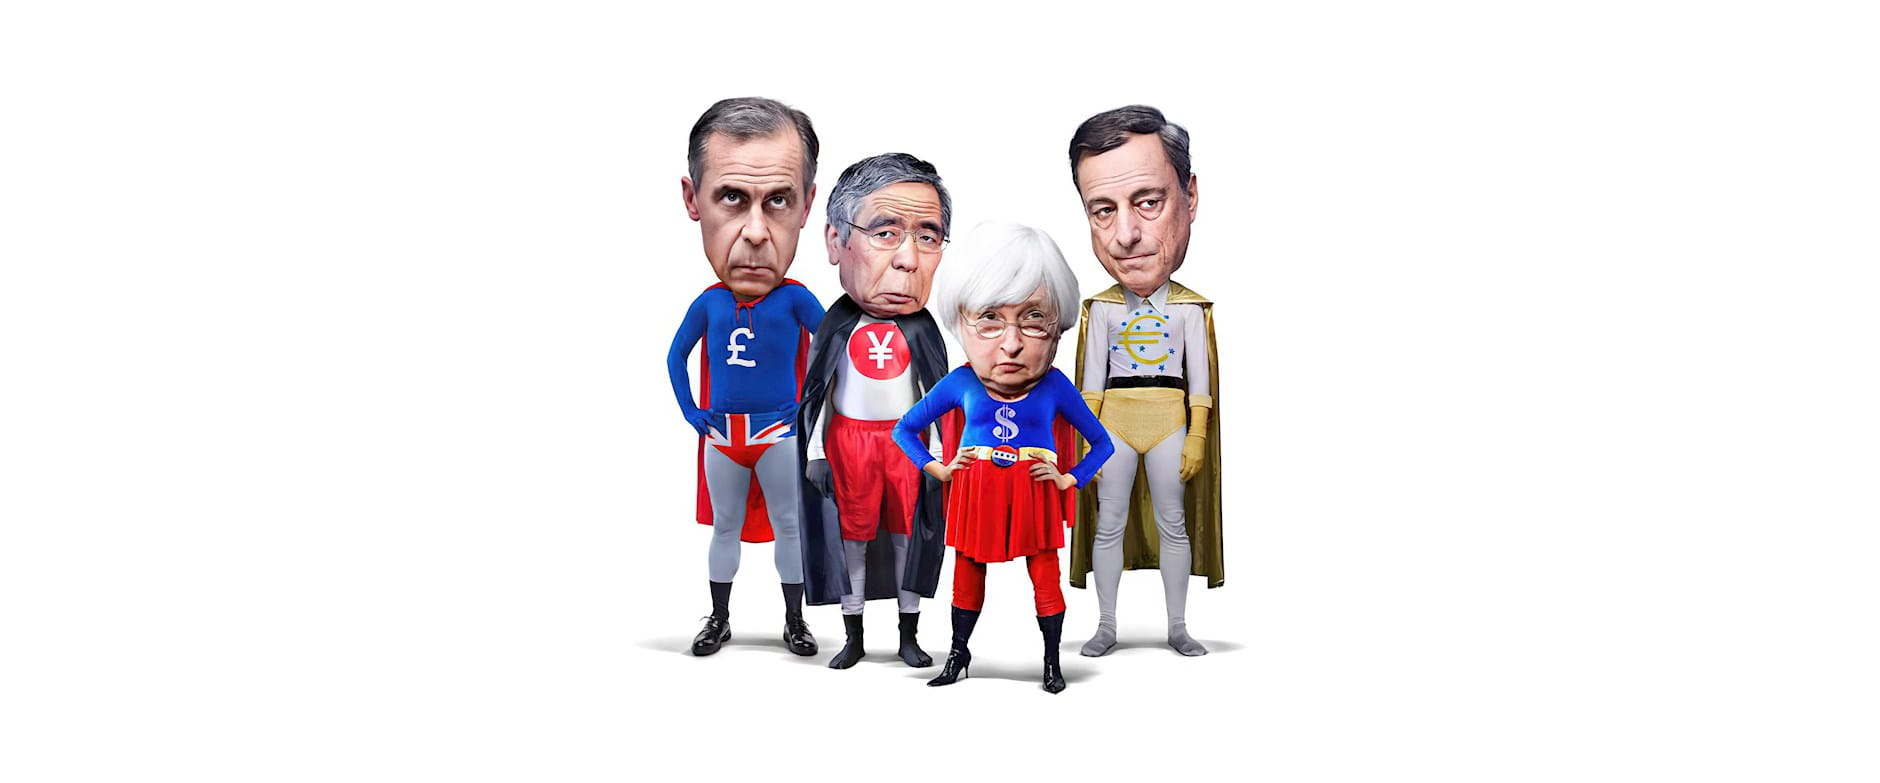 Central bankers that look like superheroes